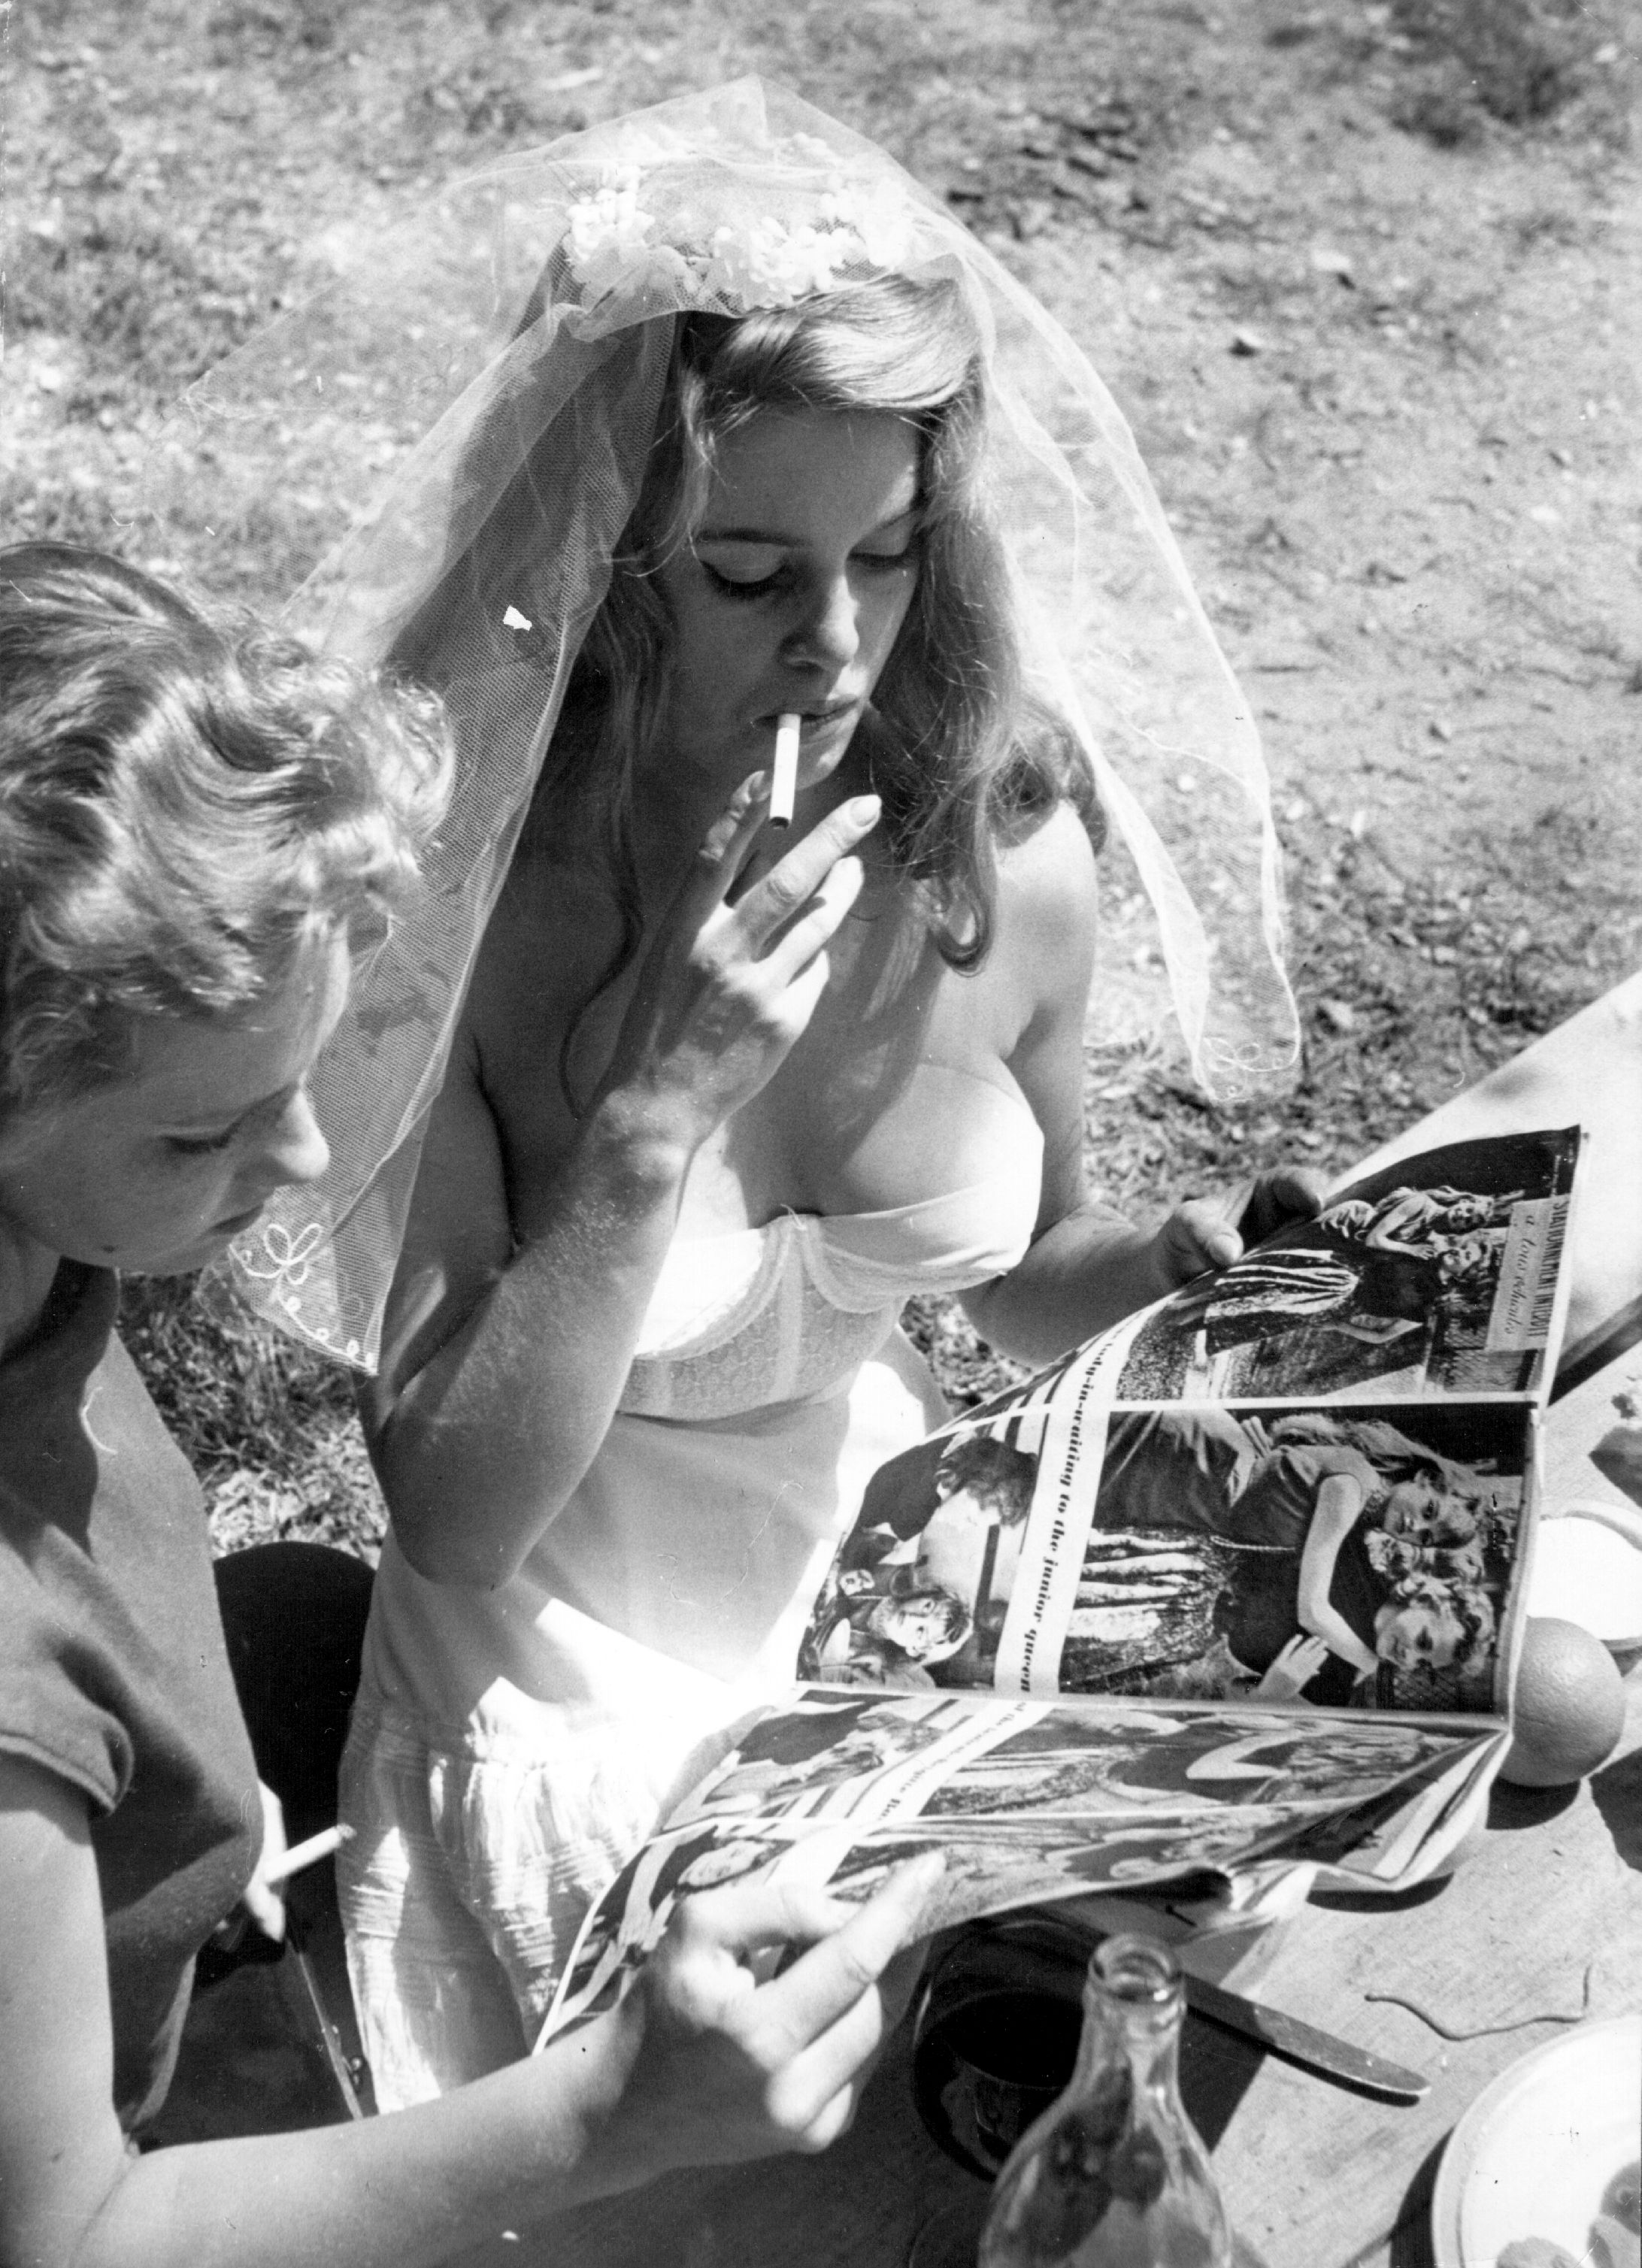 Brigitte Bardot taking a smoking break while filming "And God Created Woman" on July 1, 1956, in San Tropez, France. | Source: Getty Images